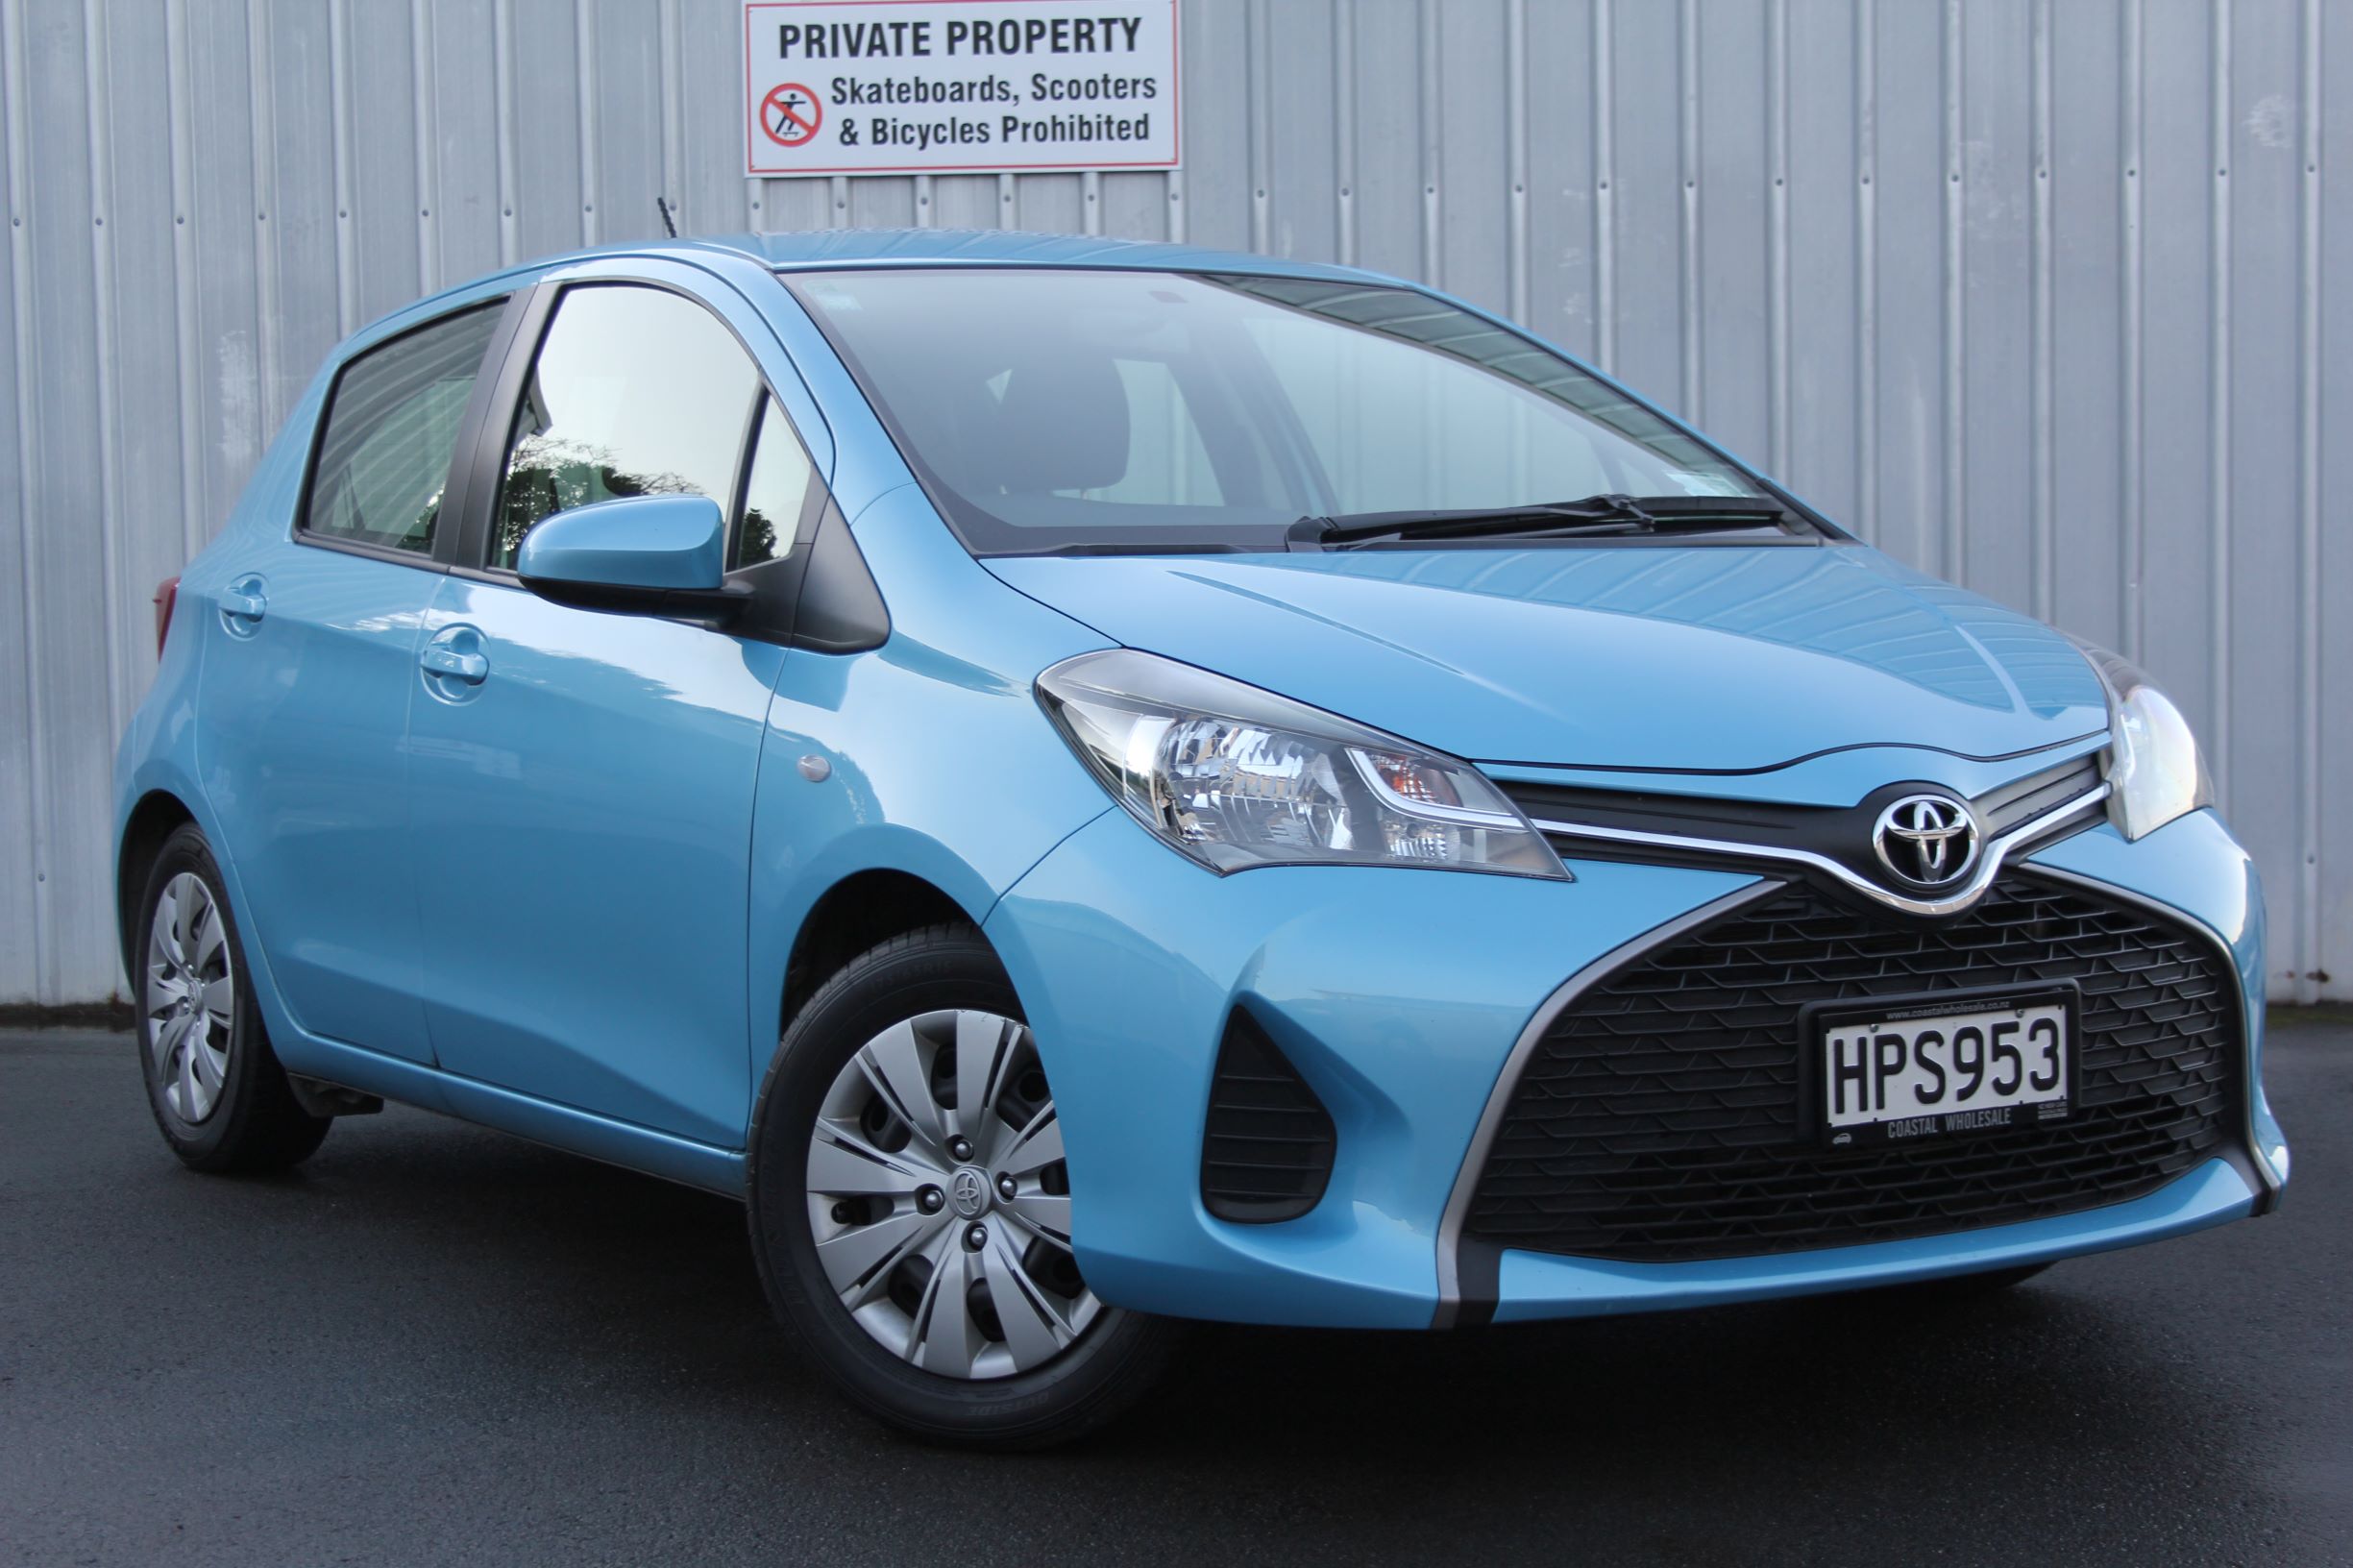 Toyota Yaris GX 2014 for sale in Auckland